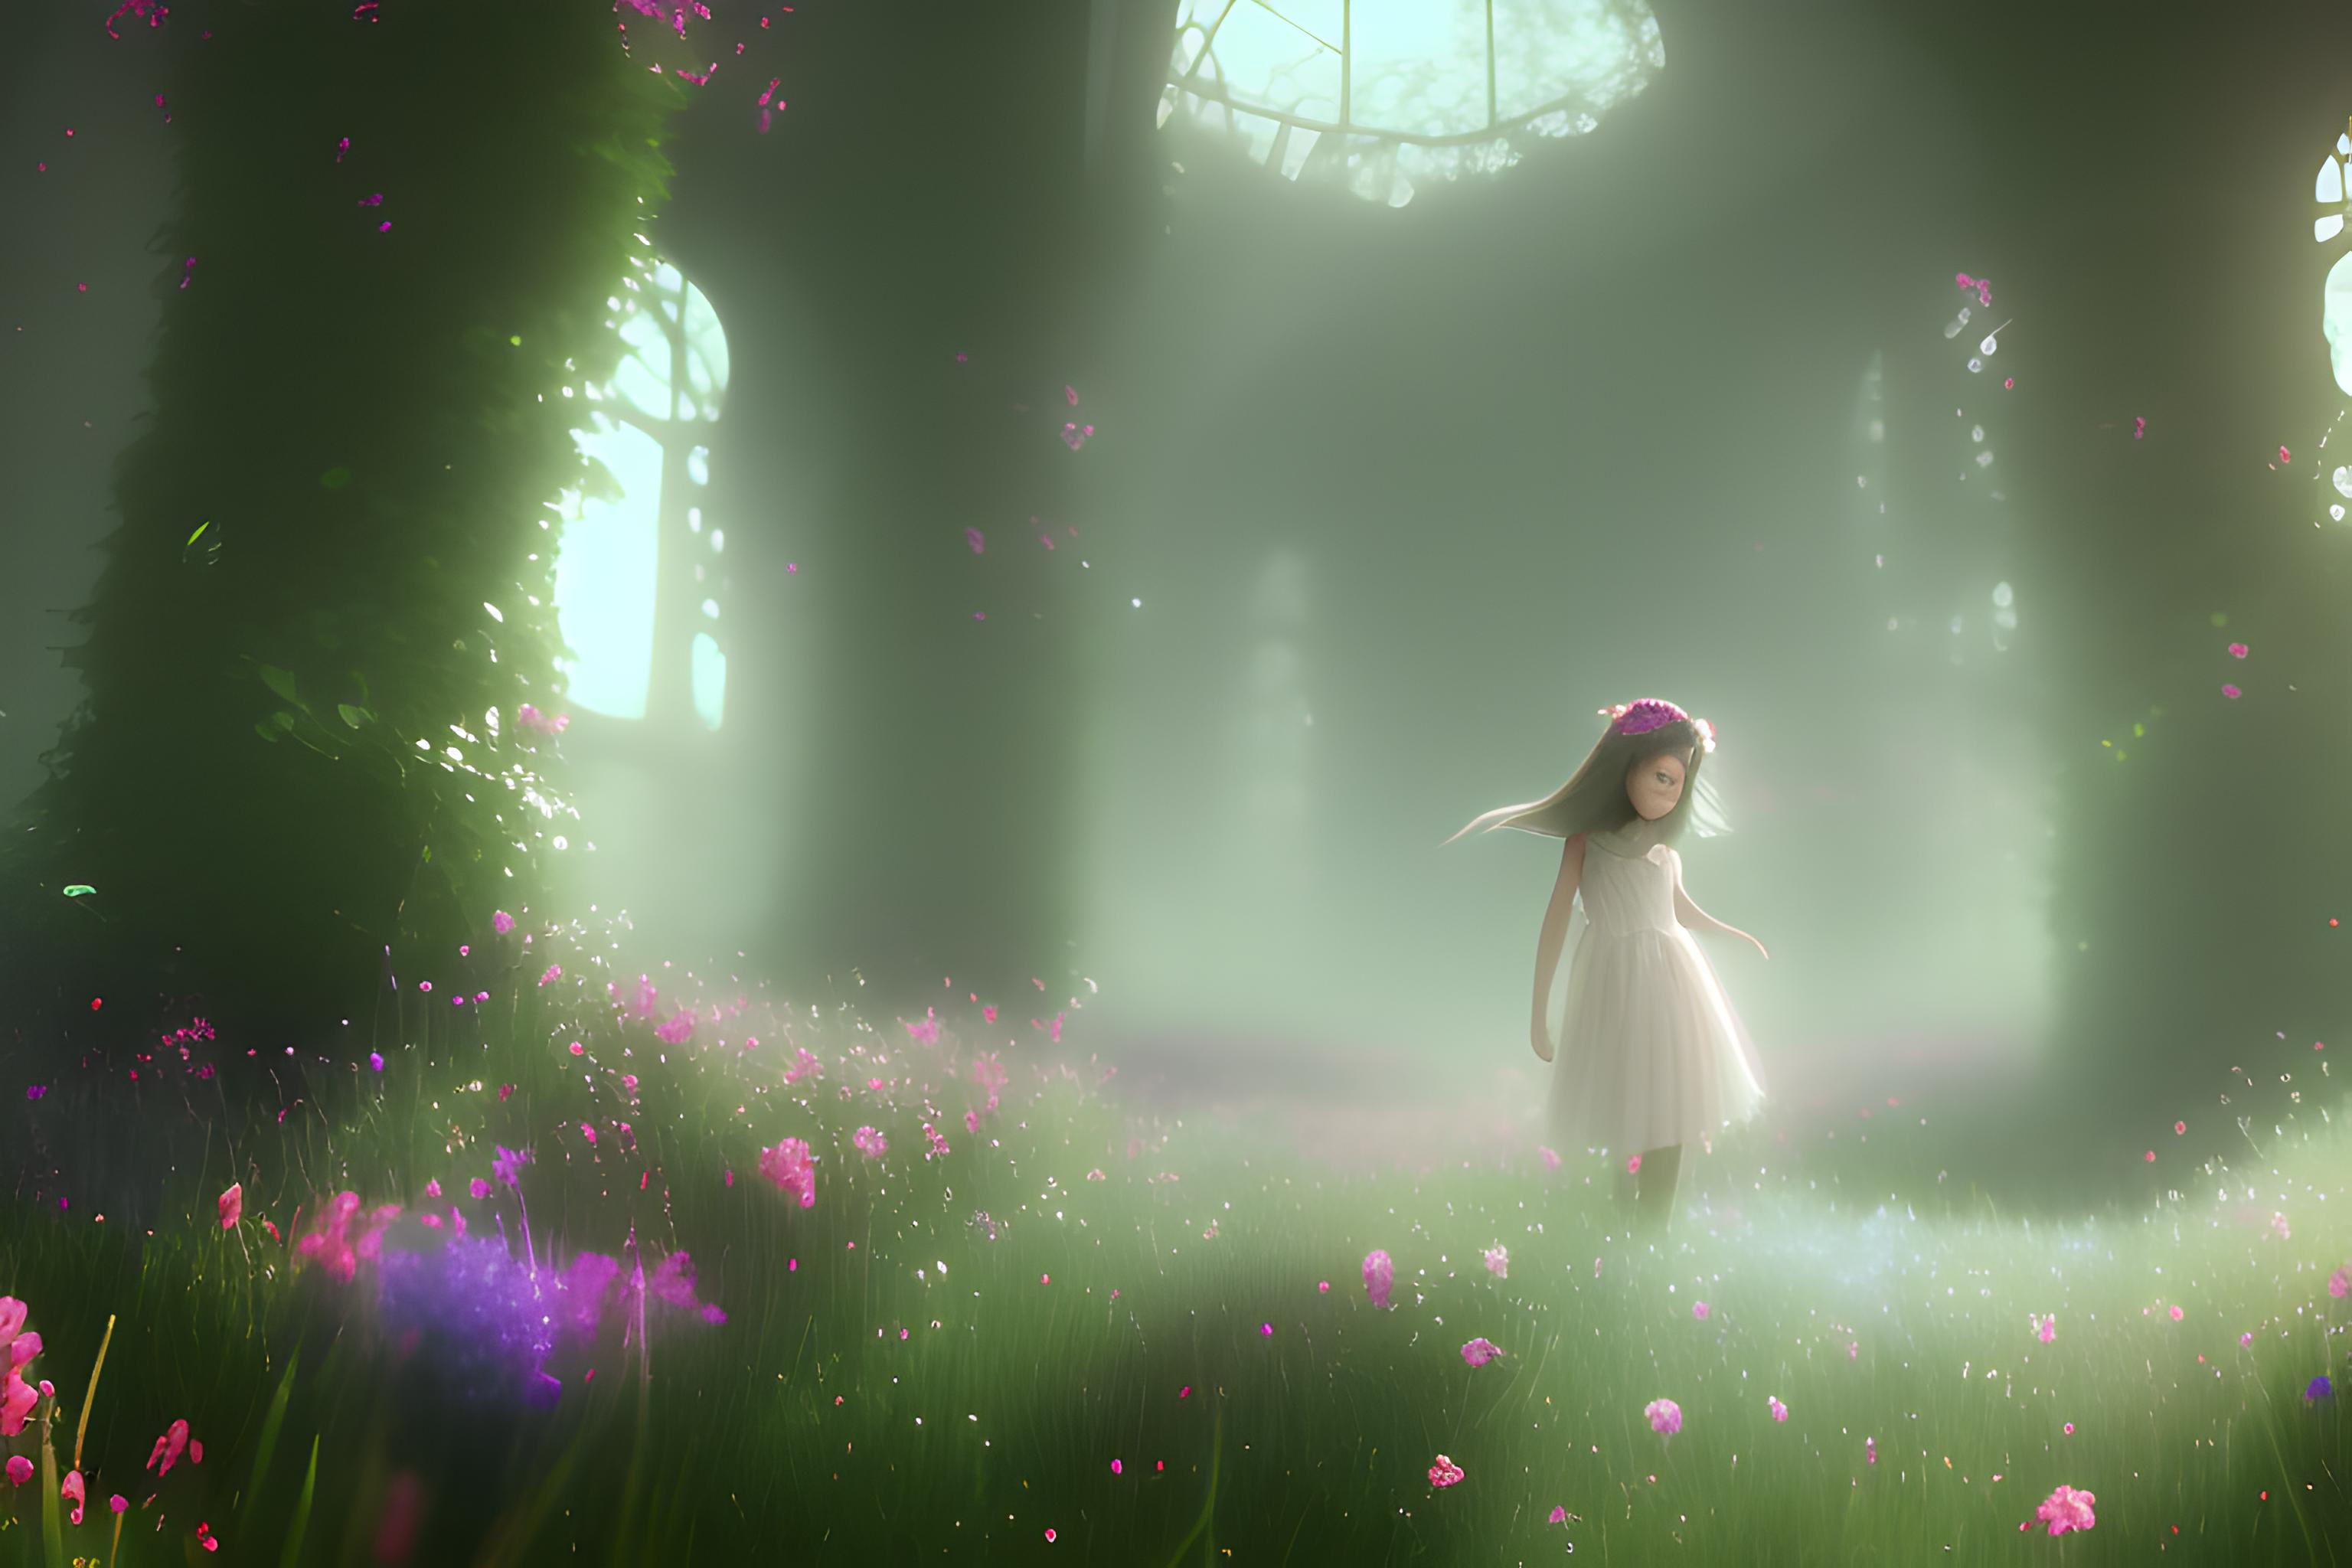 A Background For Lyrics Music Video, A Girl In Flowers, Cinematic.